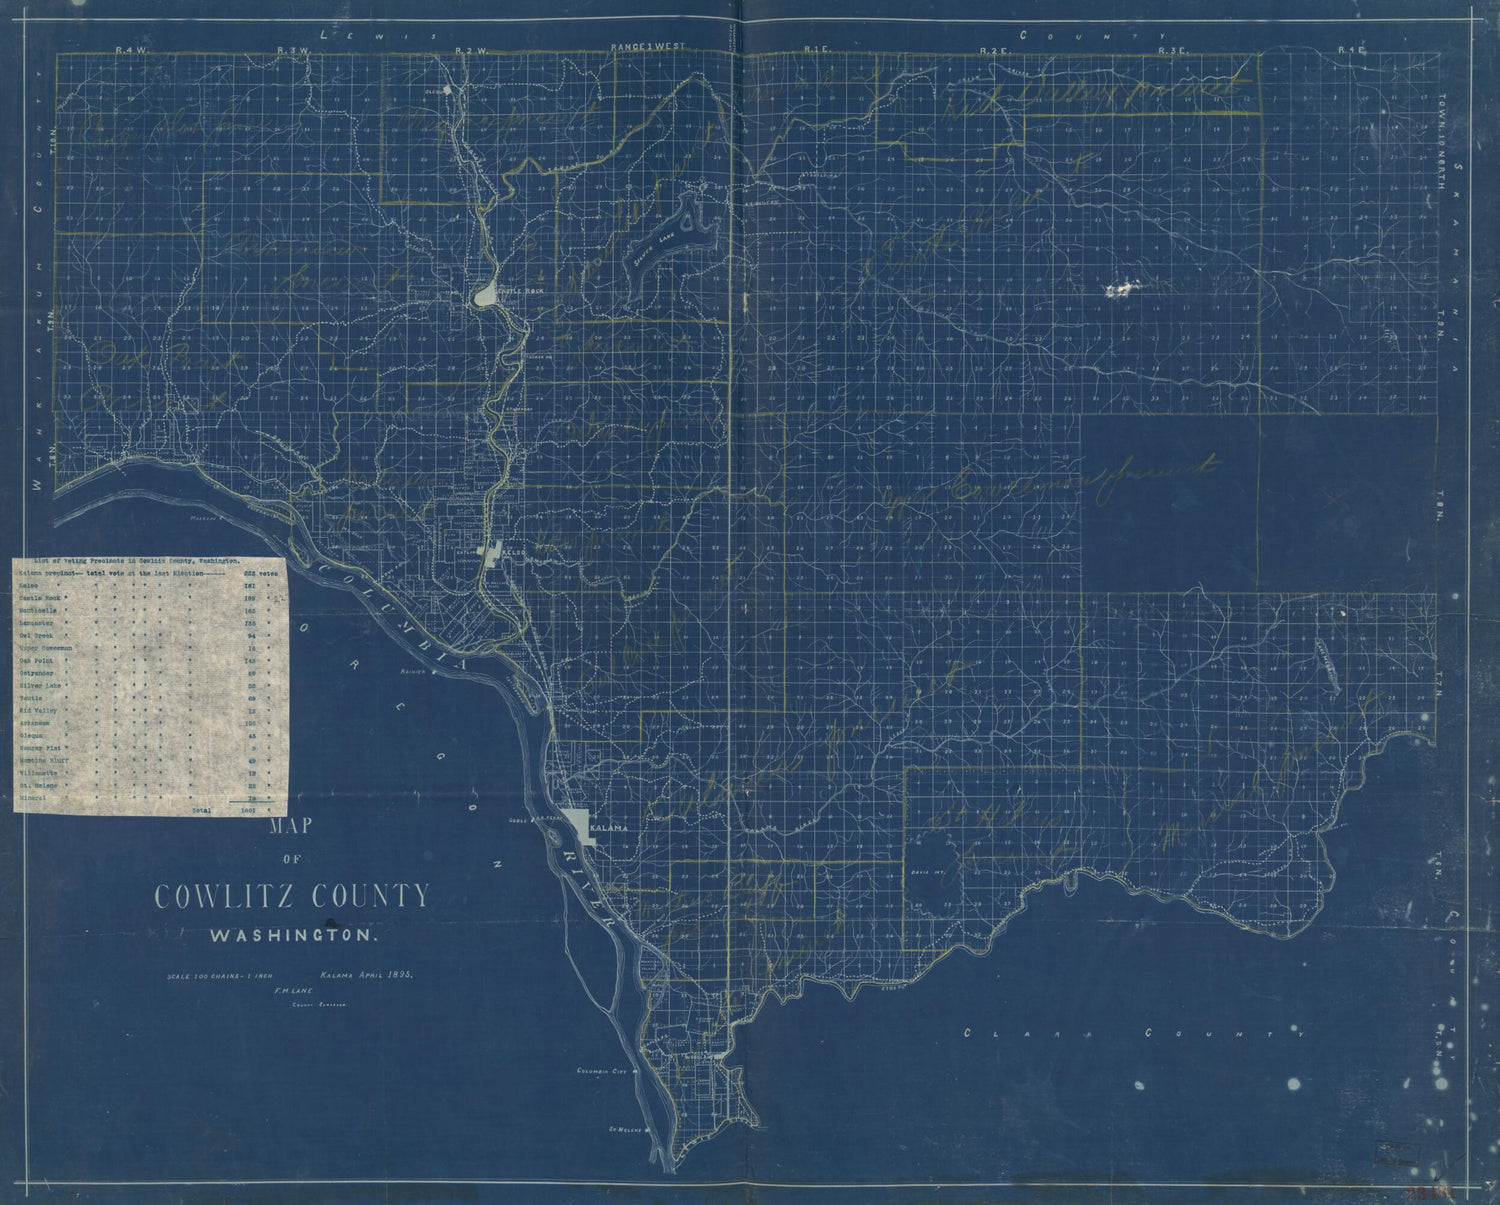 This old map of Map of Cowlitz County, Washington from 1895 was created by F. M. Lane in 1895